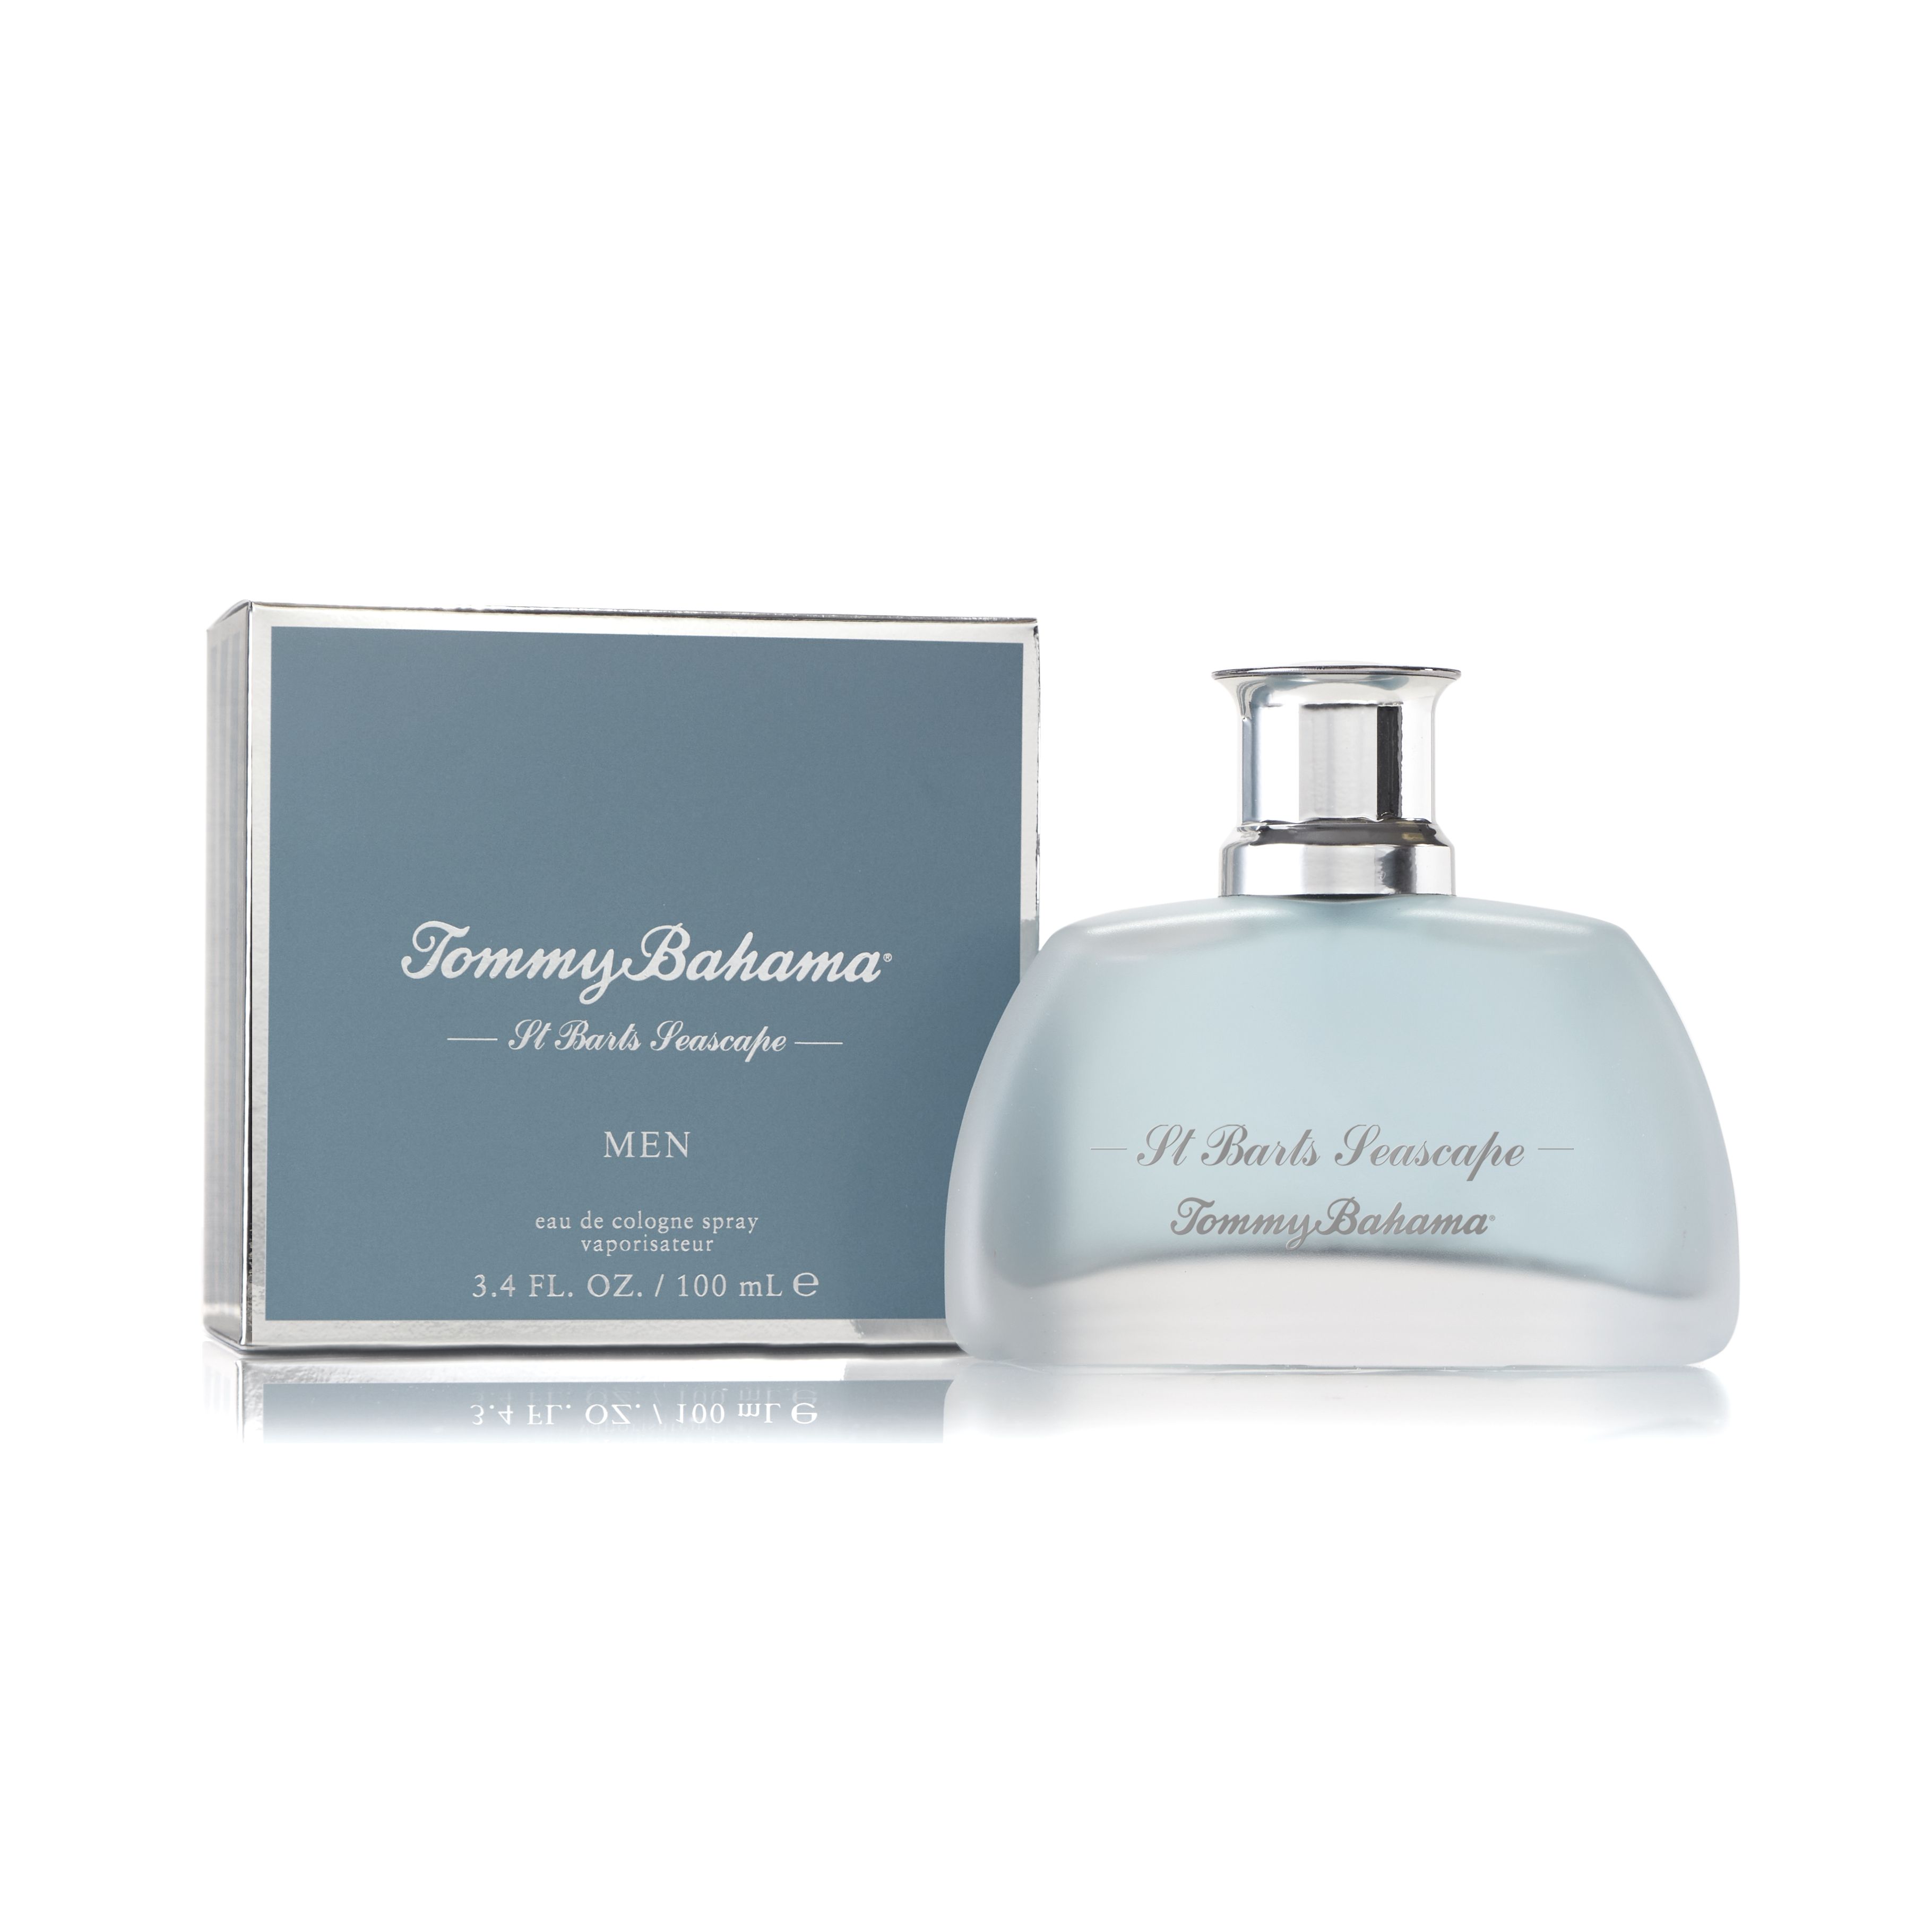 St. Barts Seascape for Men Tommy Bahama cologne - a new fragrance for ...